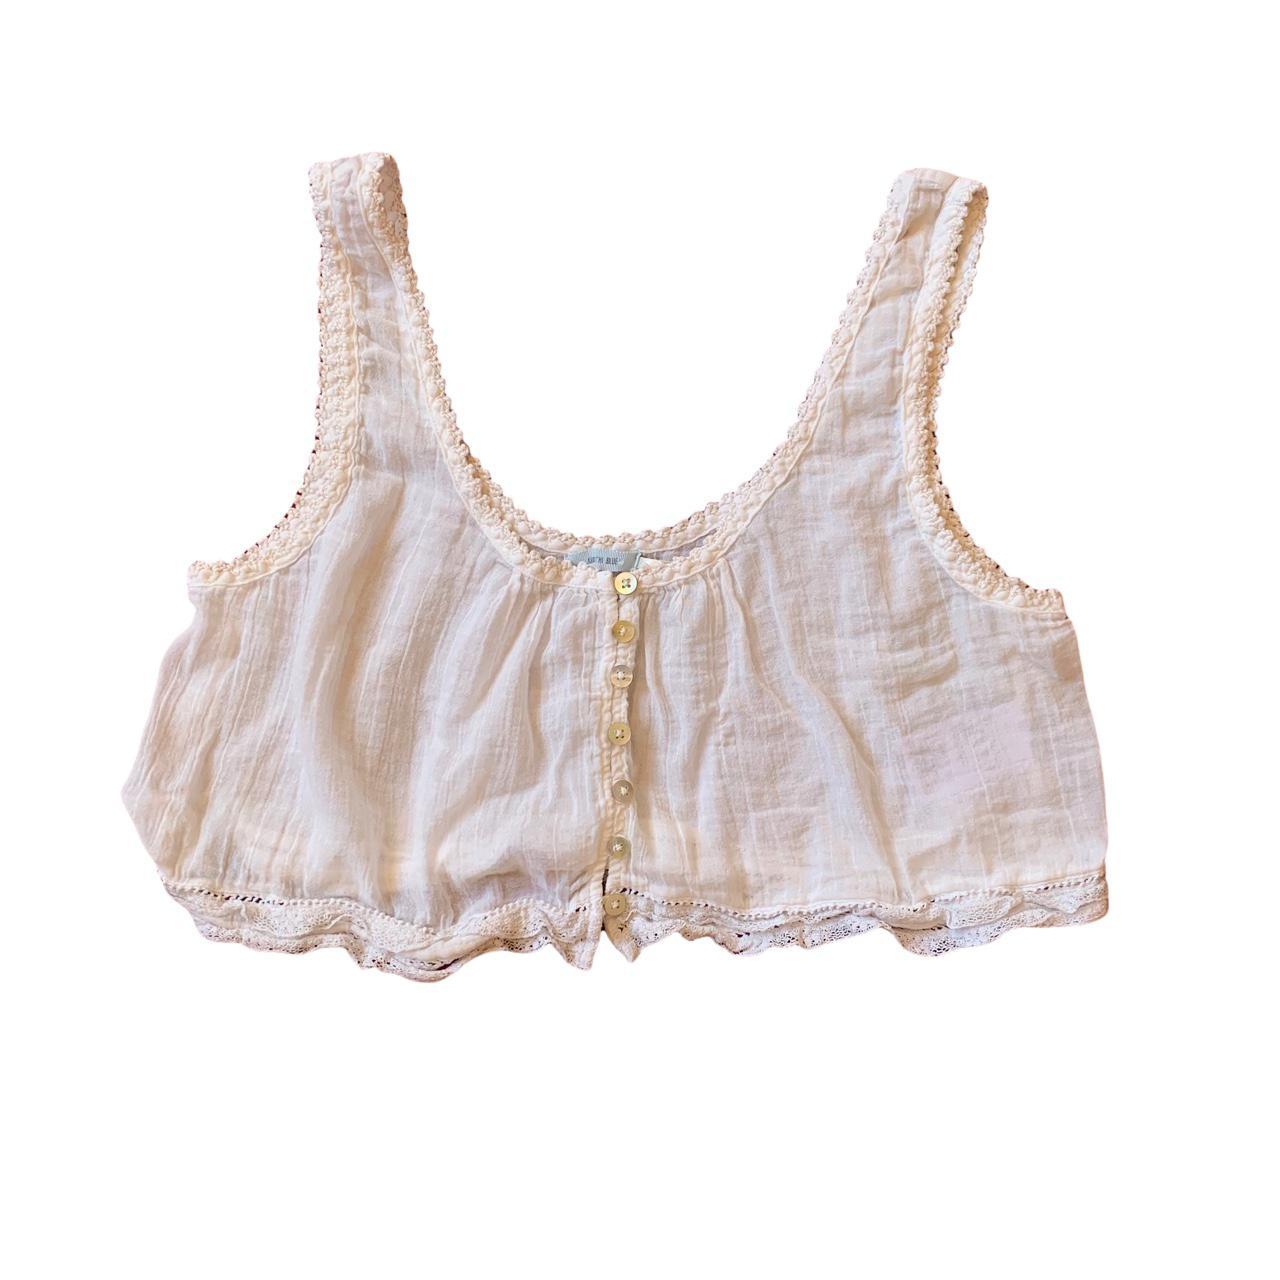 Product Image 1 - delicate sheer to transparent white/